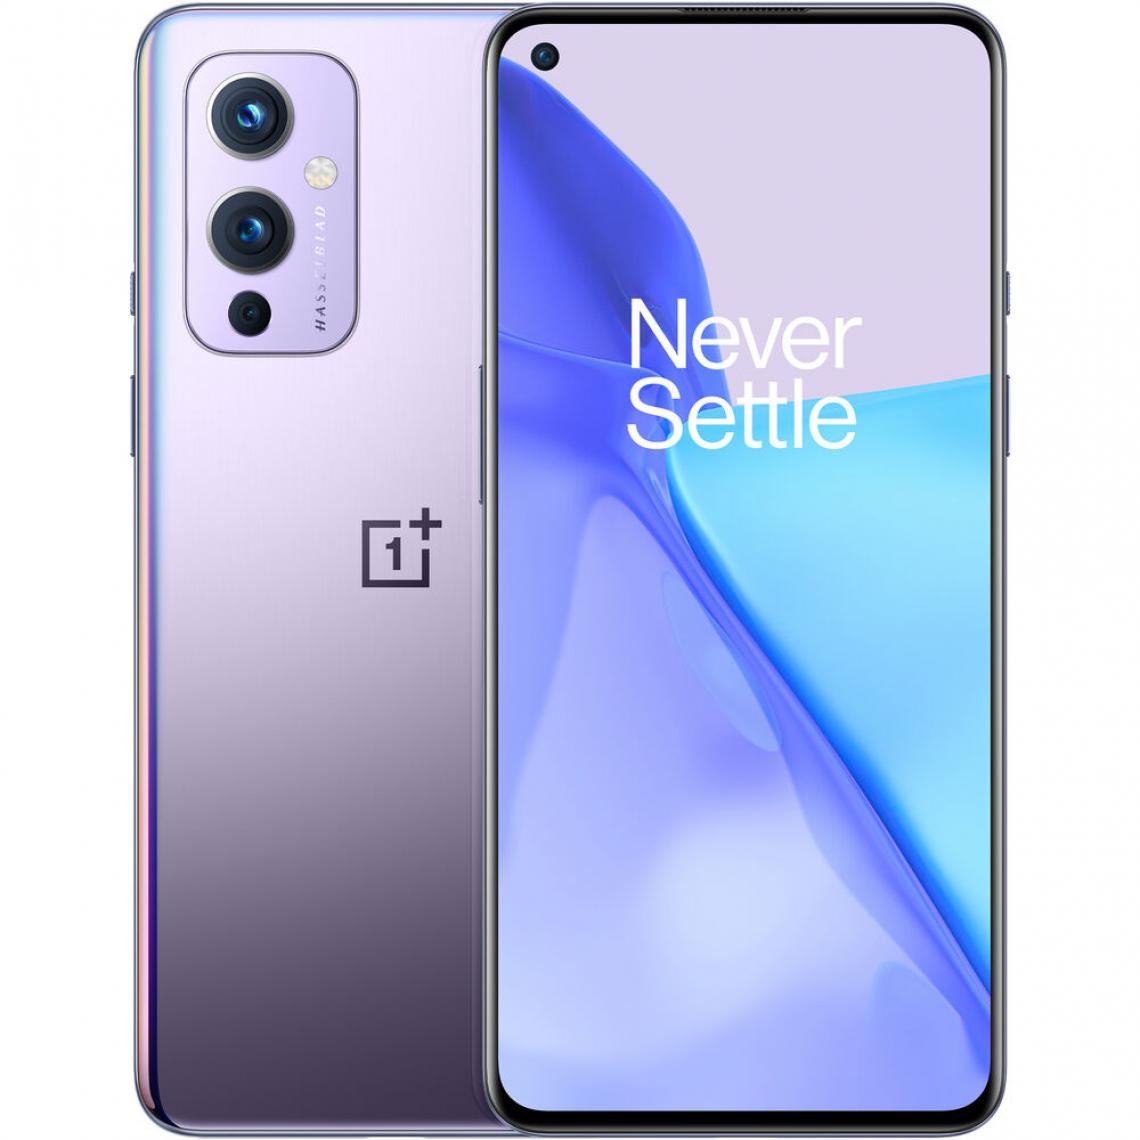 Oneplus - ONEPLUS 9 256GB (12GB Ram) 5G Winter Mist LE2110 - Smartphone Android